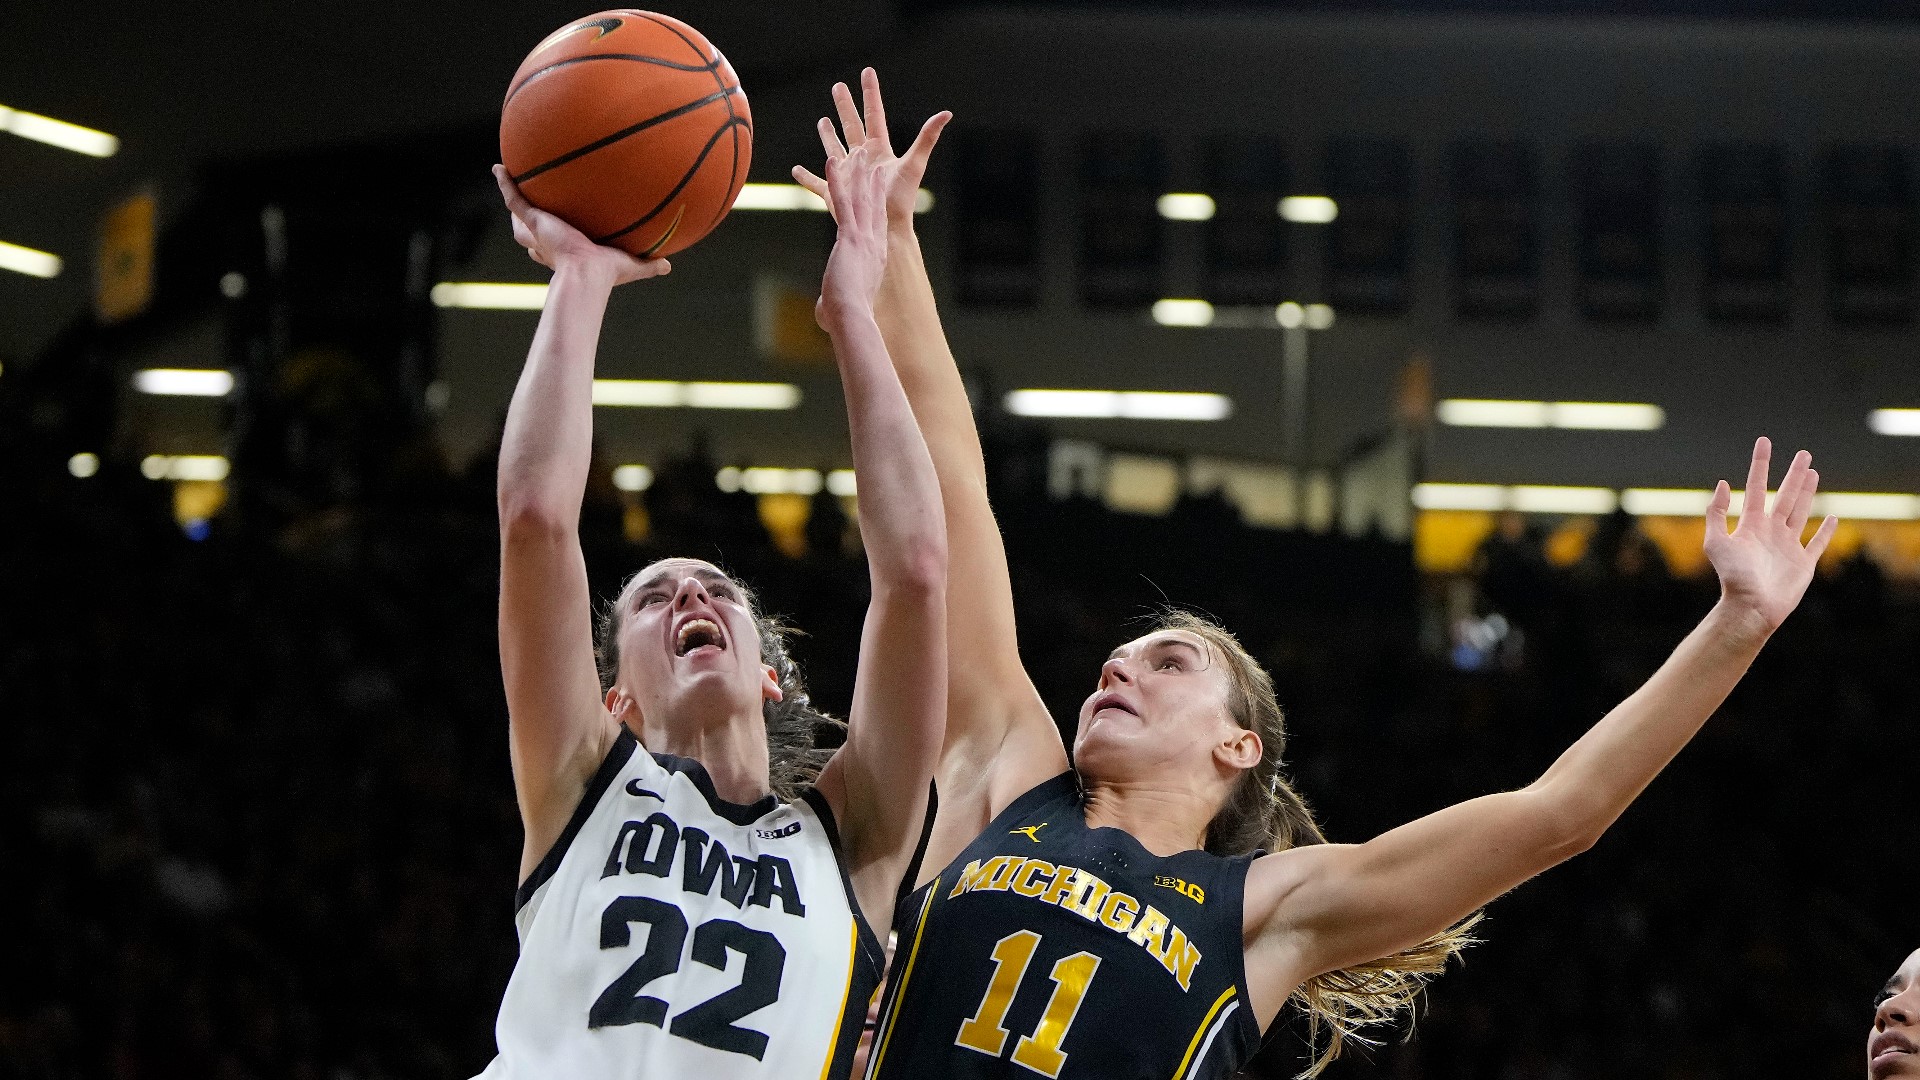 Caitlin Clark became the NCAA women’s career scoring leader and set Iowa's single-game scoring mark with 49 points.